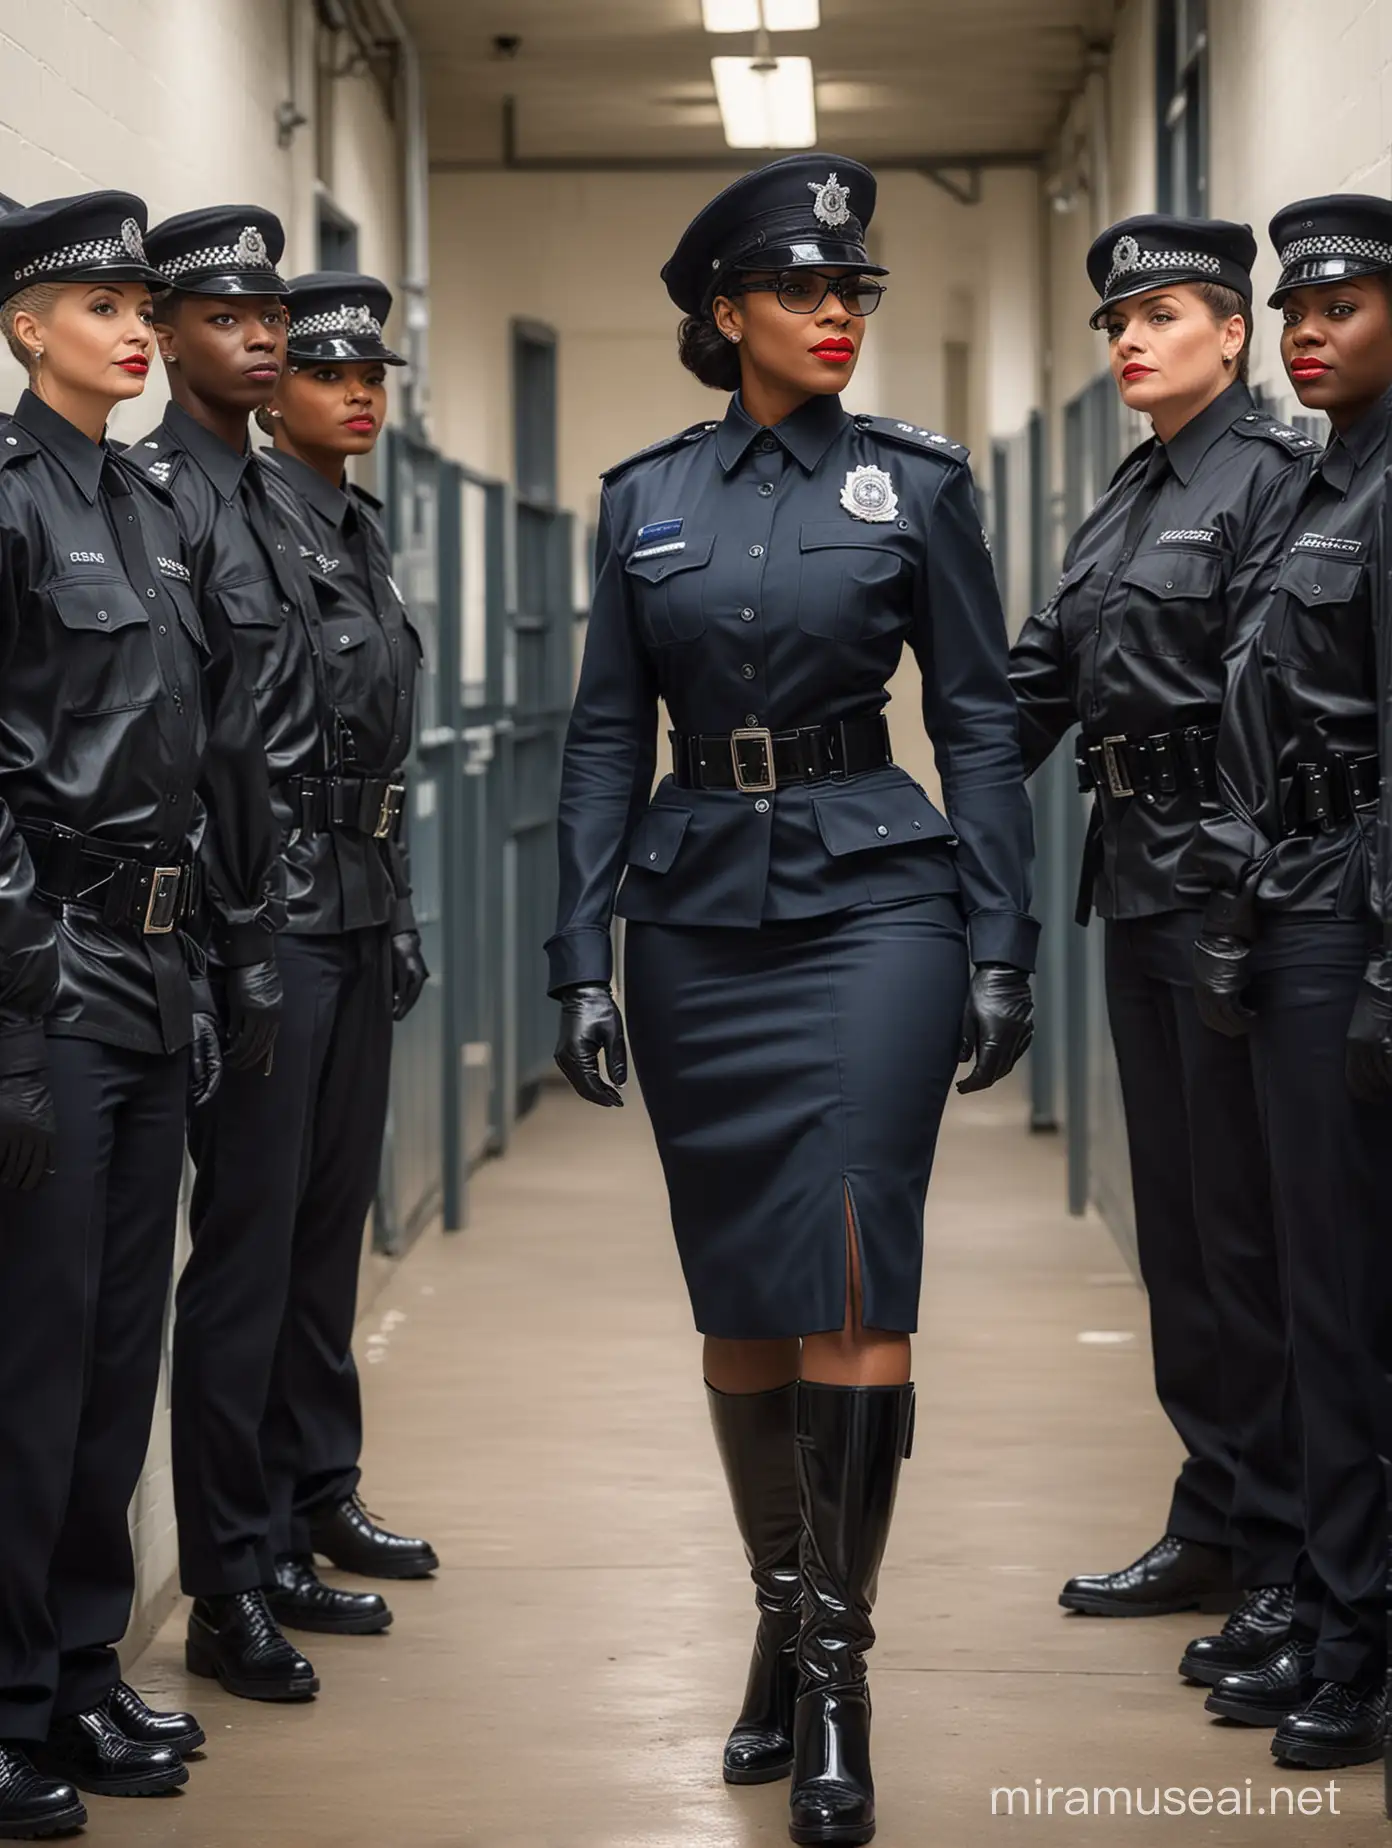 A mature and elegantly poised (((black female British police officer))) with a full, figure and striking, ruby-red lips, sporting stylish, sunglasses and a sleek, glossy (((PVC police uniform))), complete with a long, professionally-styled skirt, boots, and gloves. She confidently directs a row of submissive male prisoners standing obediently before her in a (((correctional facility))), exuding an authoritative air of feminine dominance